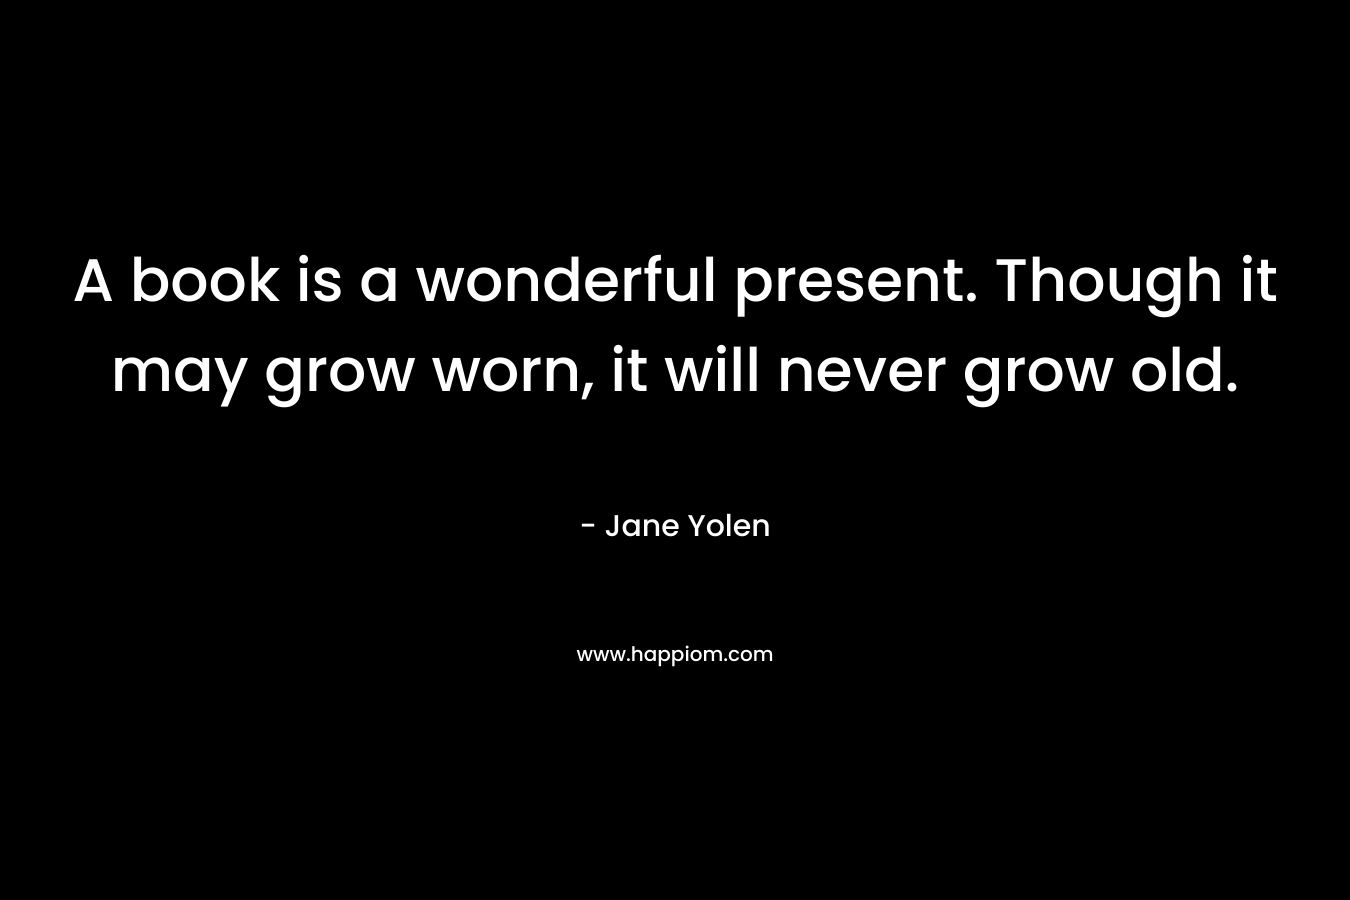 A book is a wonderful present. Though it may grow worn, it will never grow old.